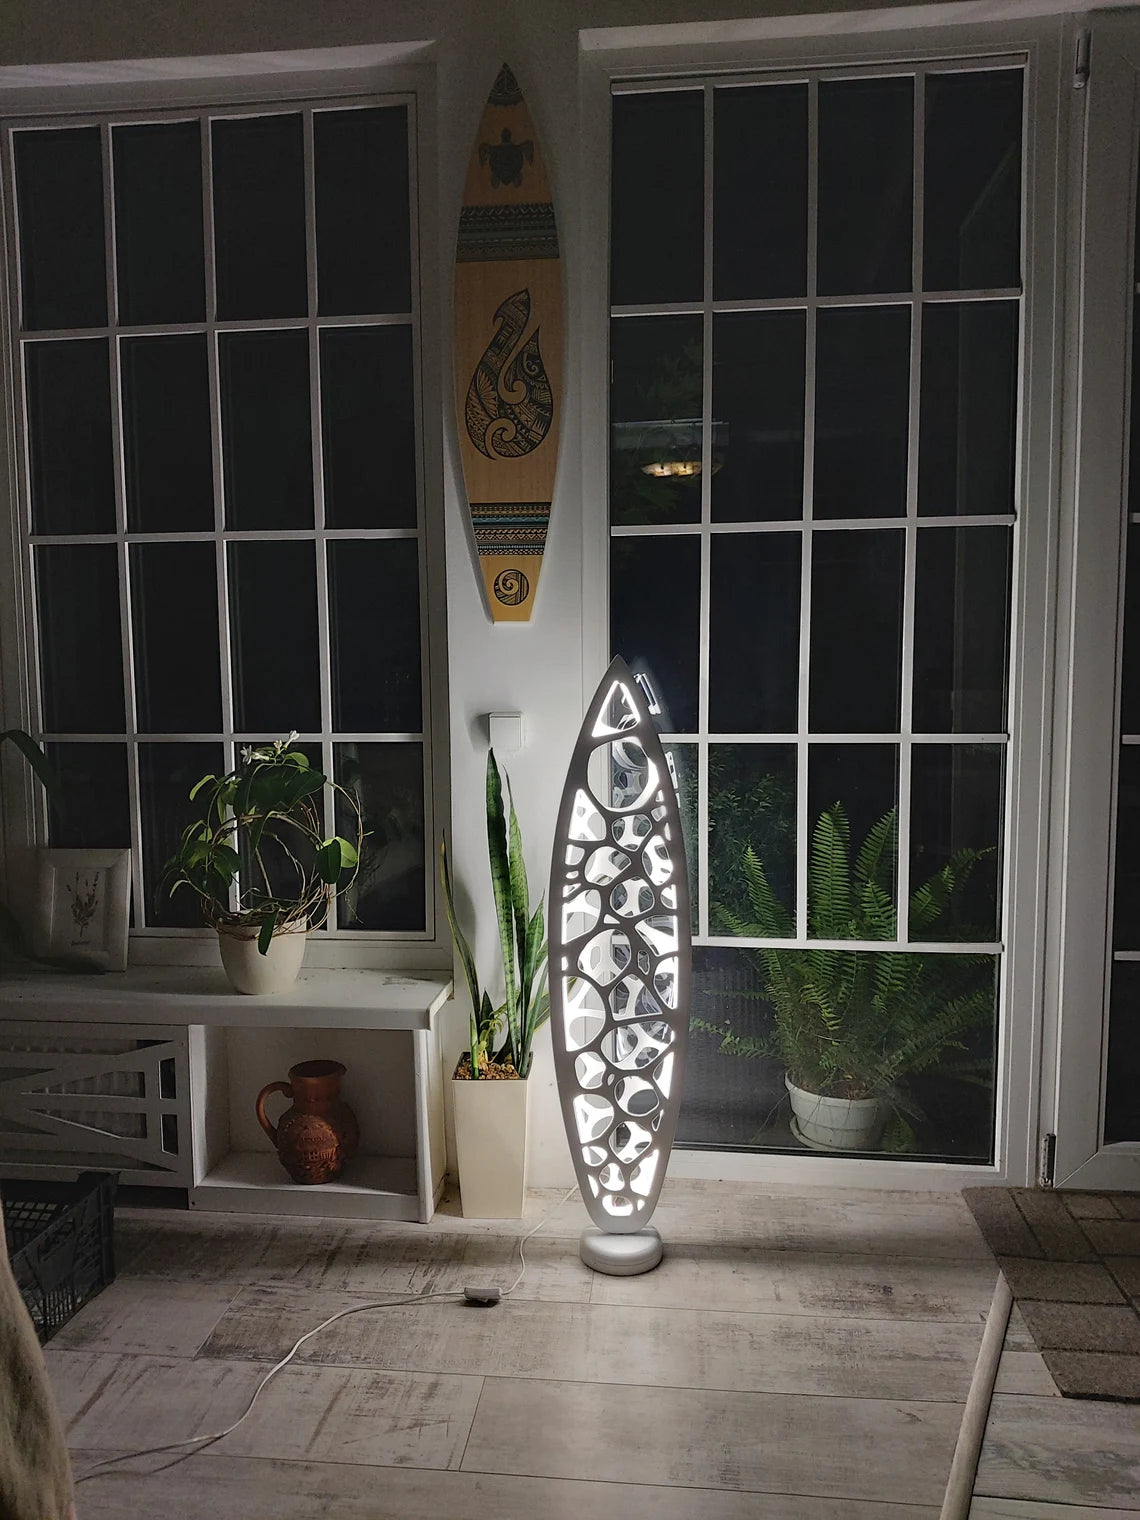 Nautical Decor Lamp: Surfboard Shaped Floor Lamp With Sea Ripples Effect Carving